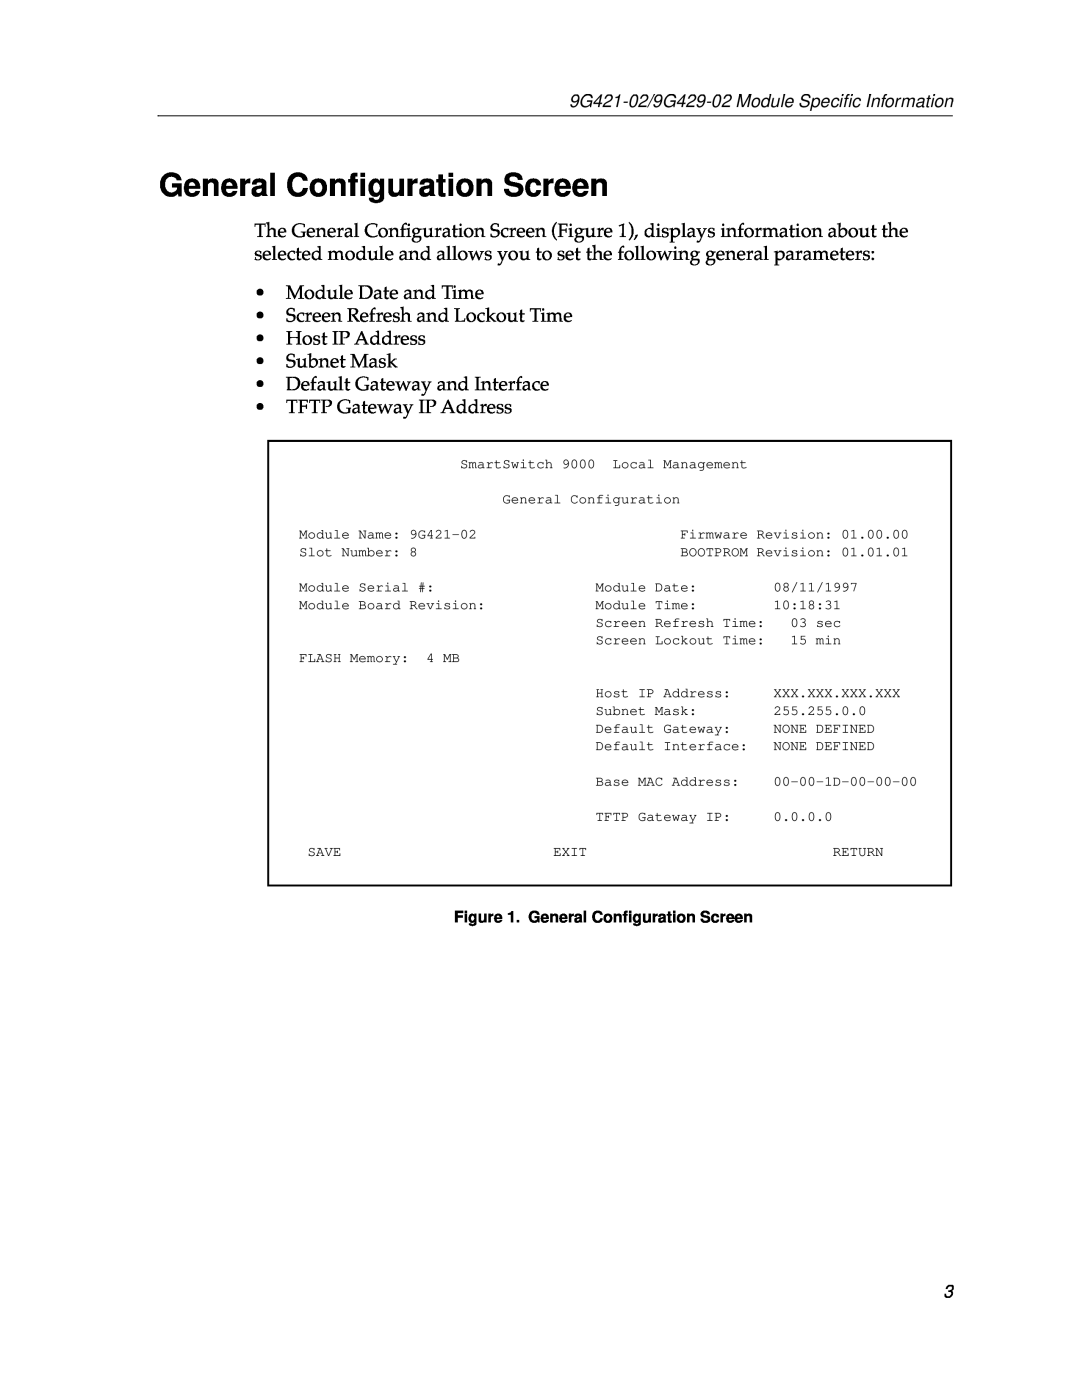 Cabletron Systems 9G421-02, 9G429-02 appendix General Conﬁguration Screen 